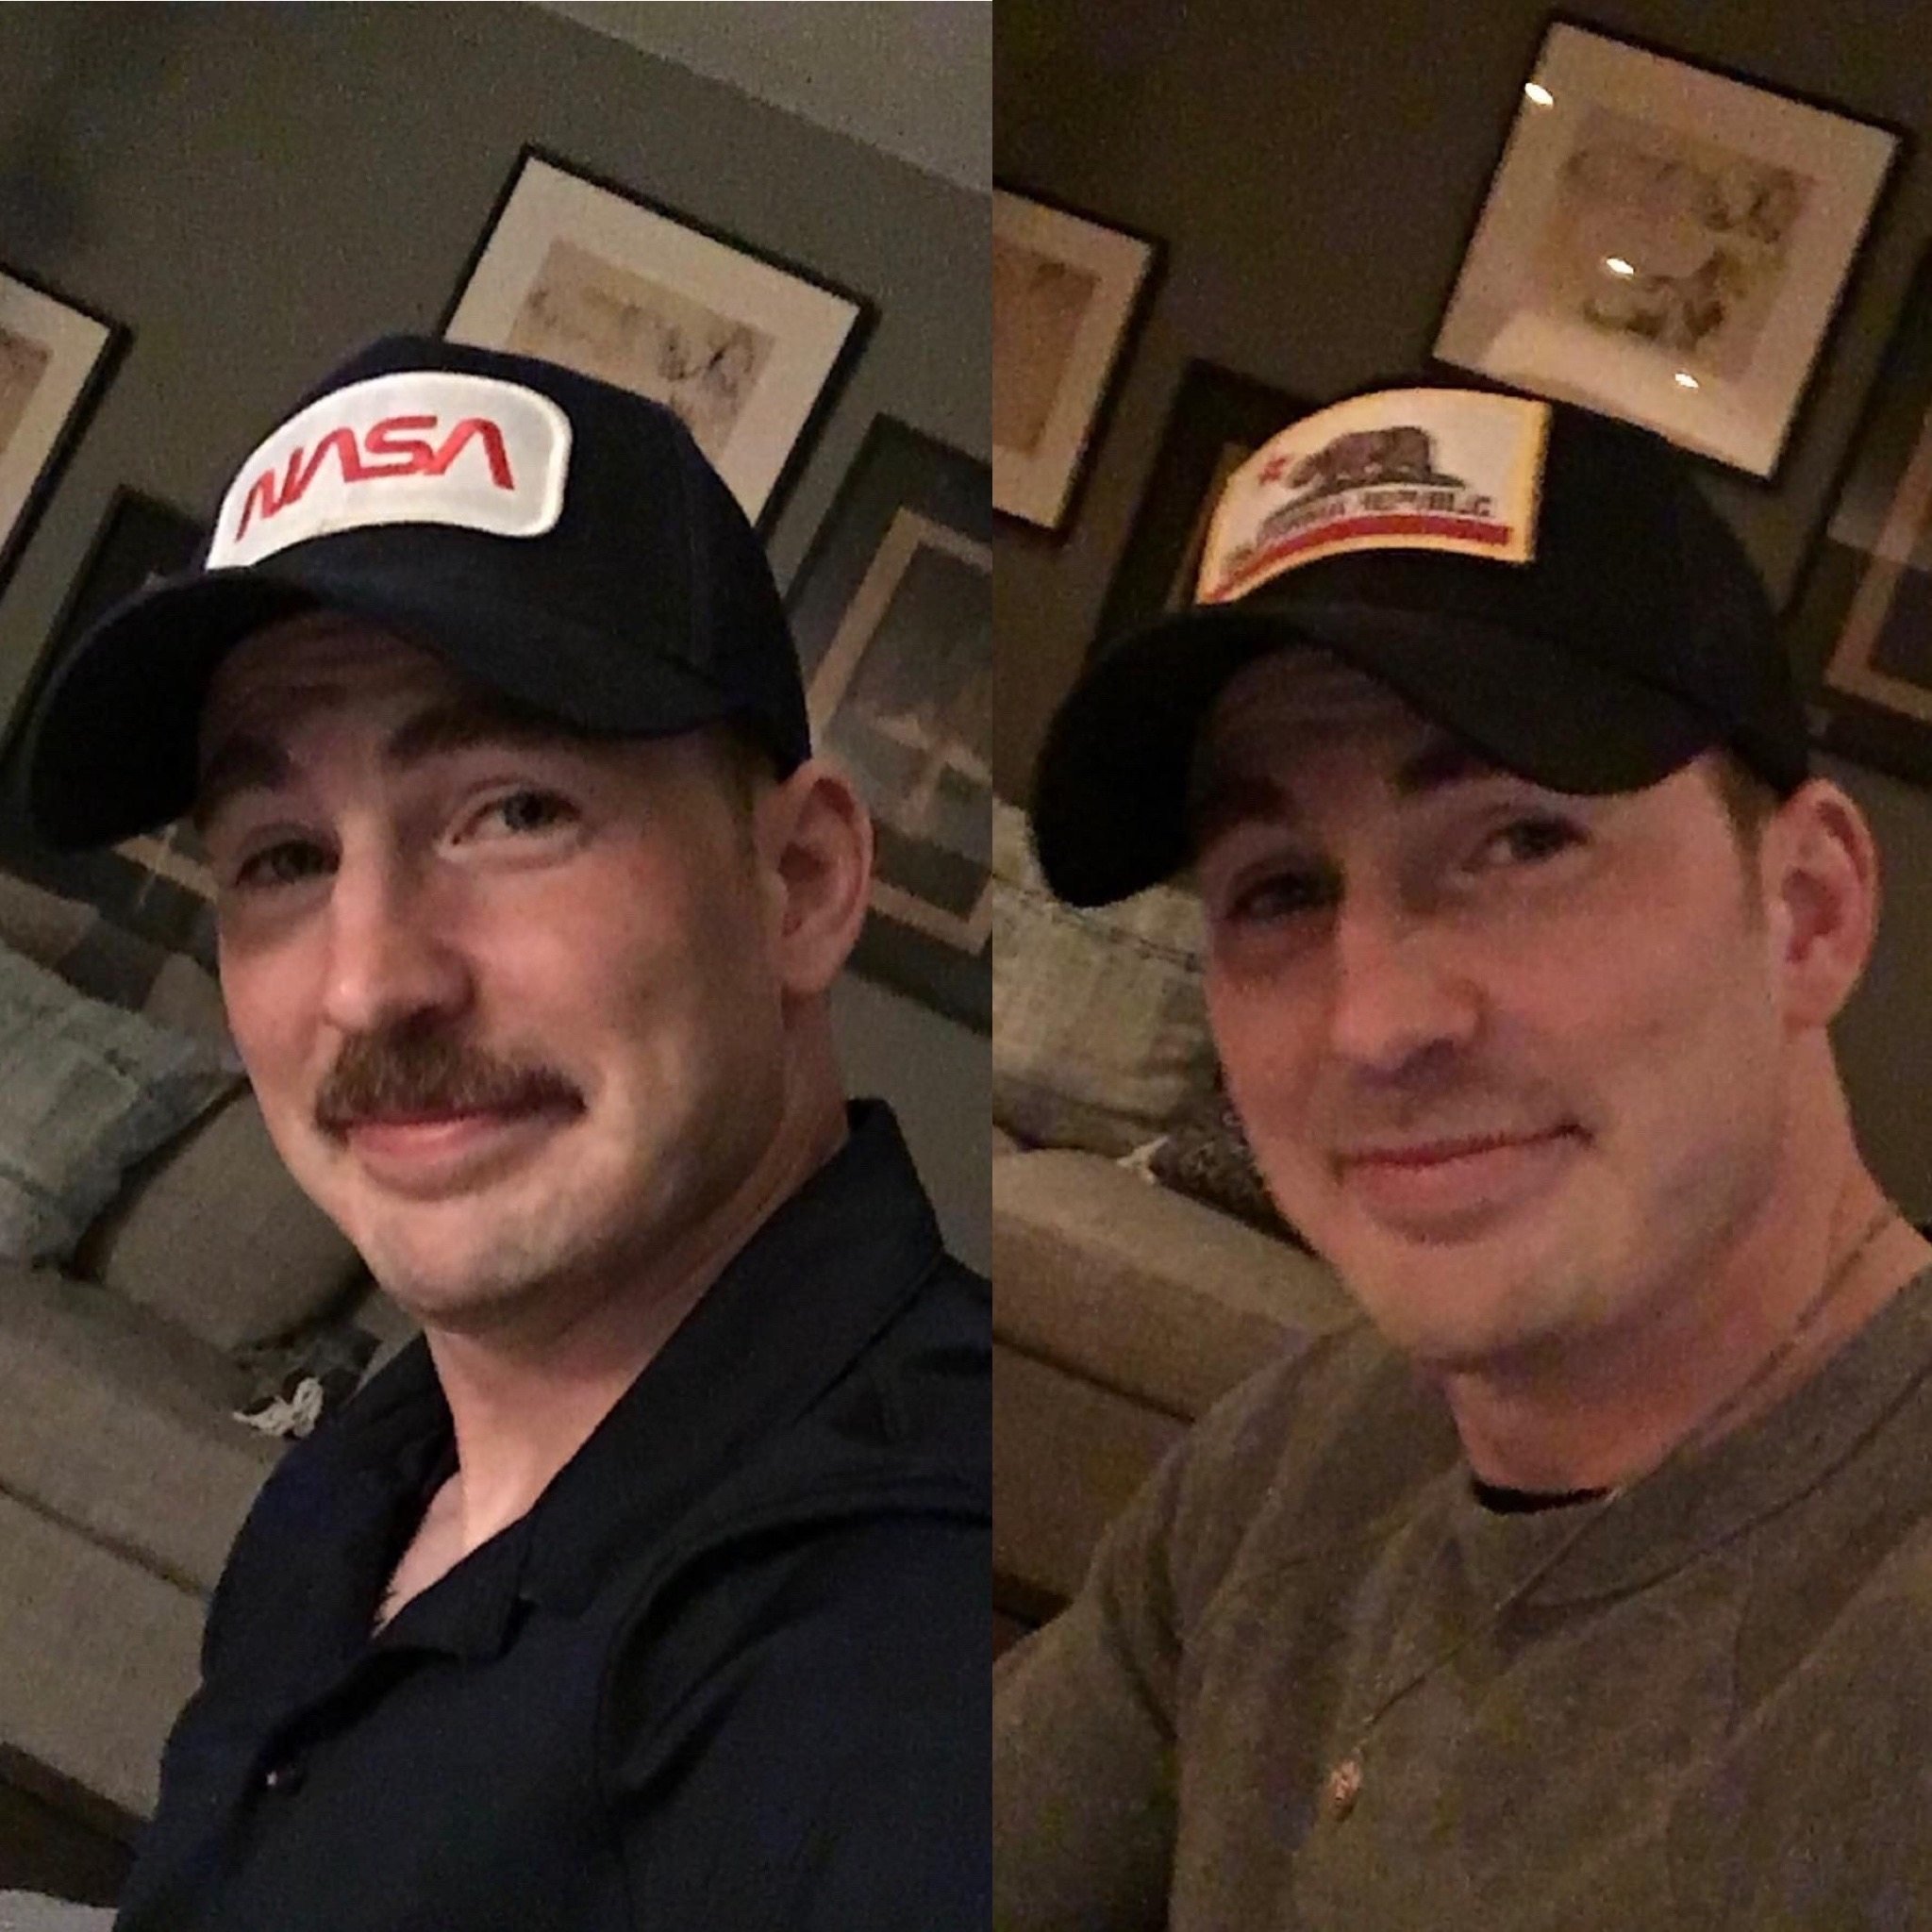 Chris Evans before and after The Gray Man. Photo: Twitter